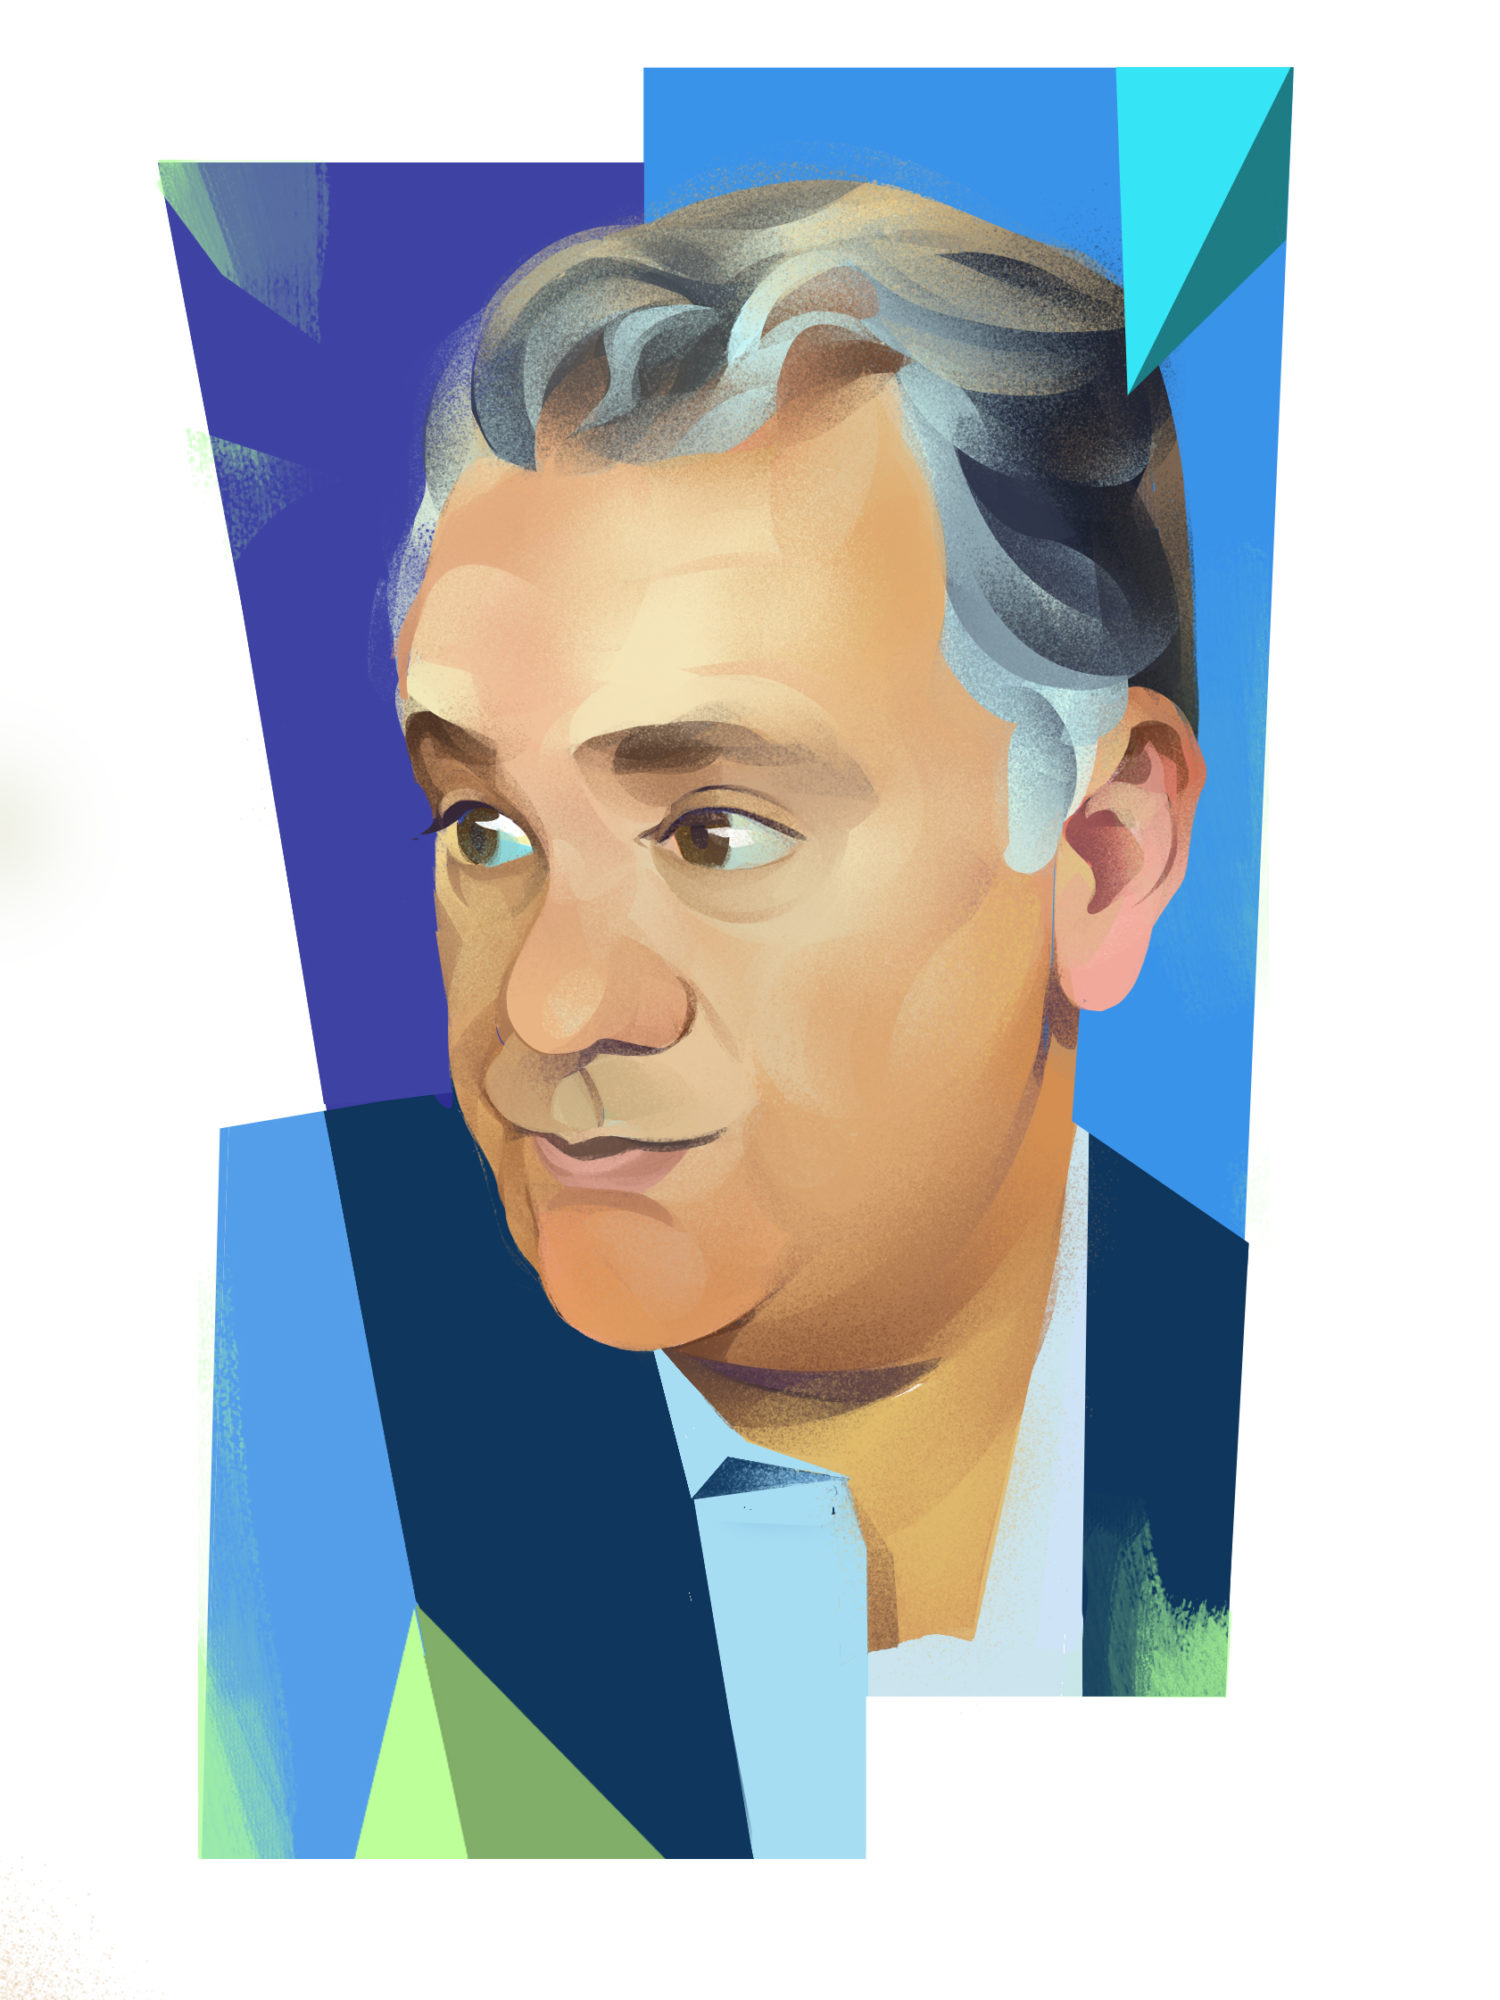 Illustration Dr. Barry Rubin with blue and green background